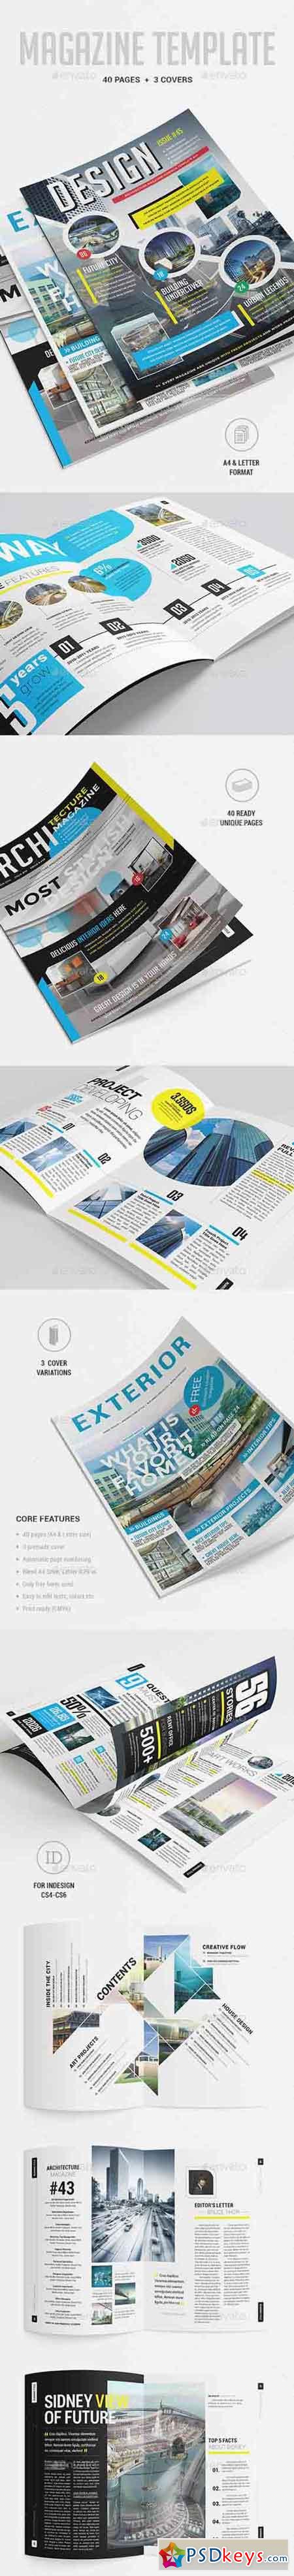 Magazine Template (A4&Letter) 9717459